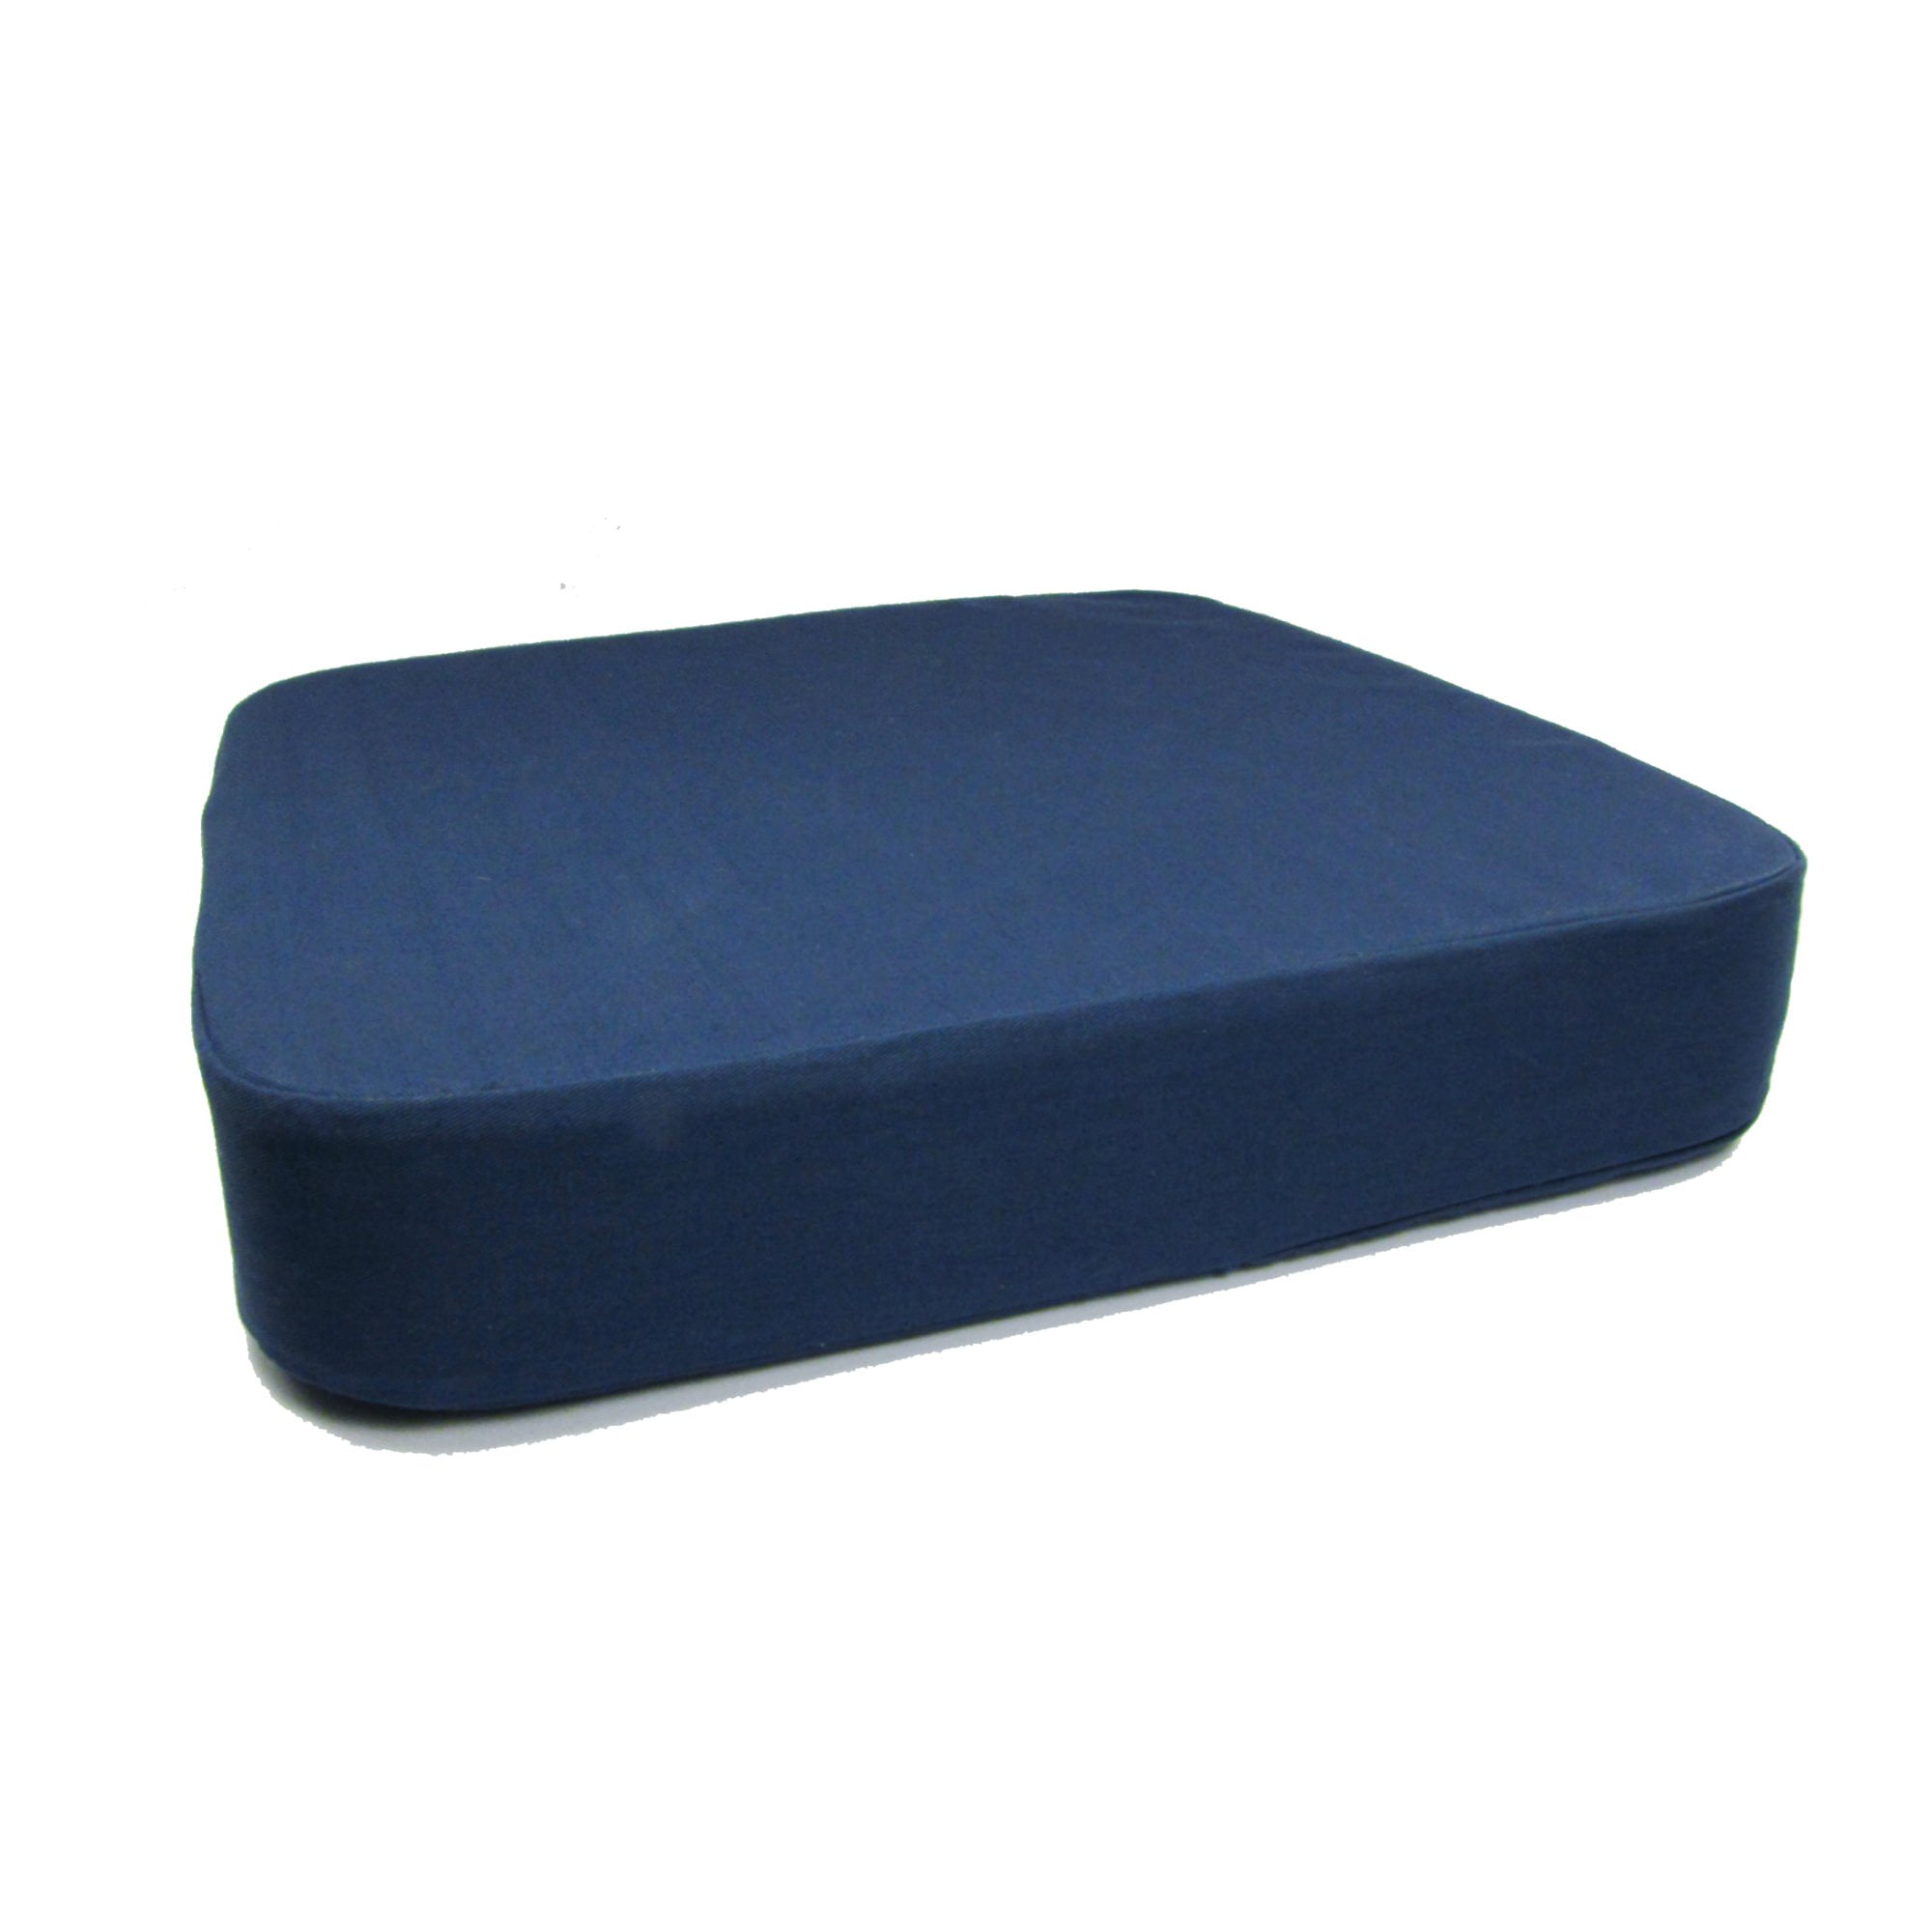  Square Memory Foam Chair Cushion,Extra Thick Seat Cushion, Cushion for Lift Chair Extra Supportive Not-Slip to Raise Height Office-h  404012cm(16x16x5inch) : Office Products